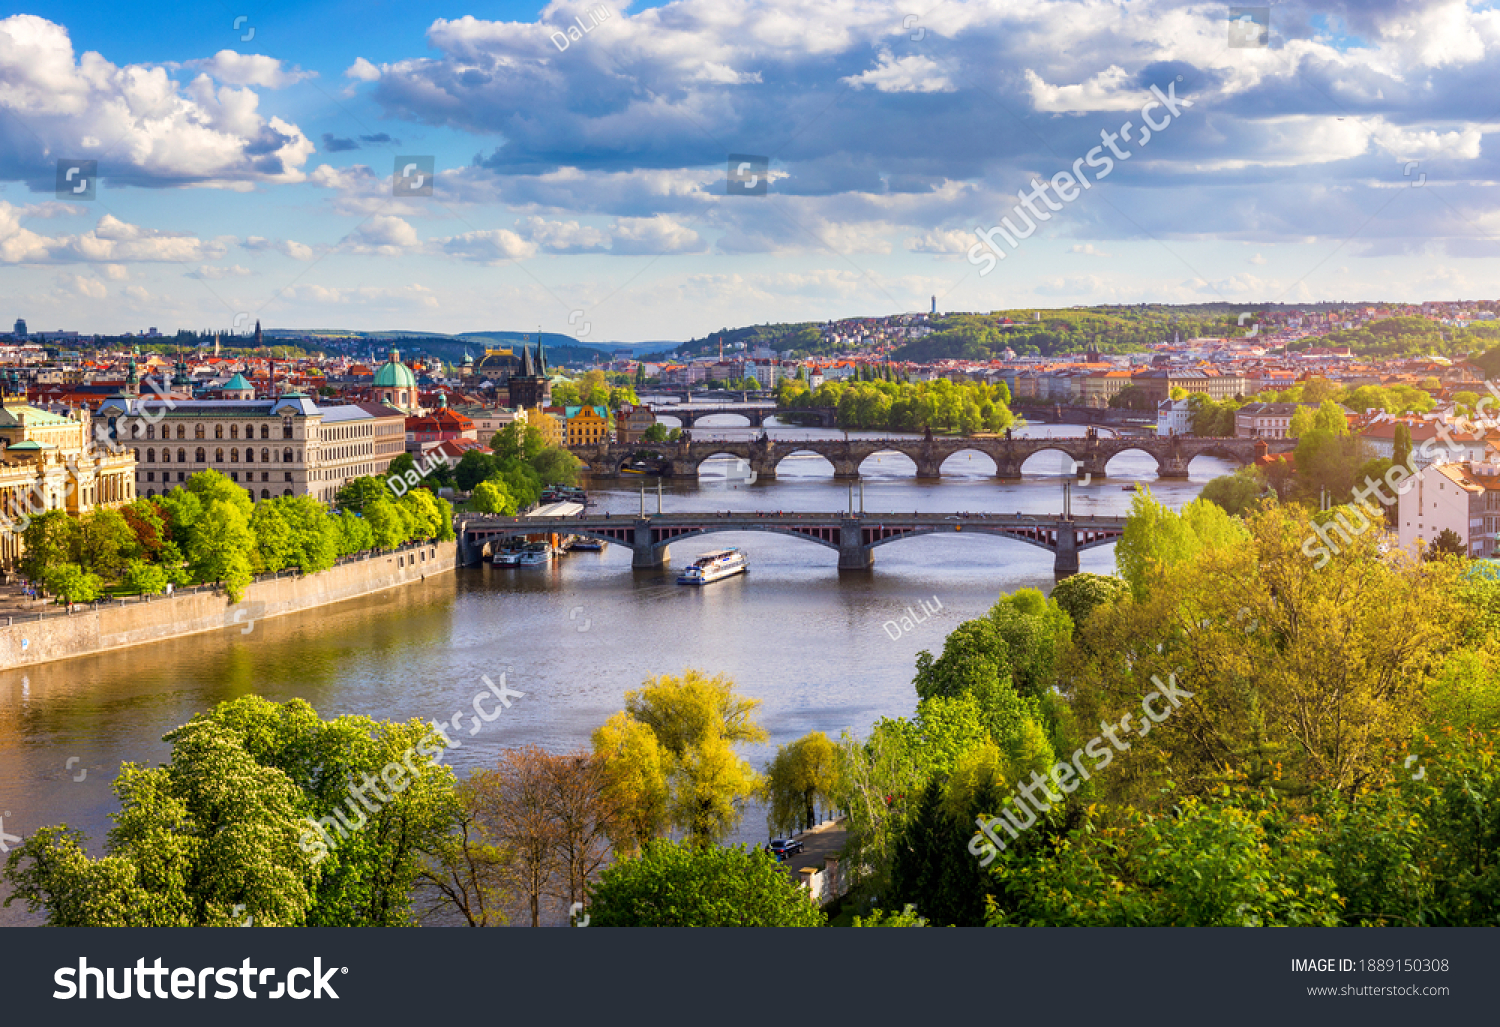 Old town of Prague. Czech Republic over river Vltava with Charles Bridge on skyline. Prague panorama landscape view with red roofs.  Prague view from Letna Park, Prague, Czechia. #1889150308